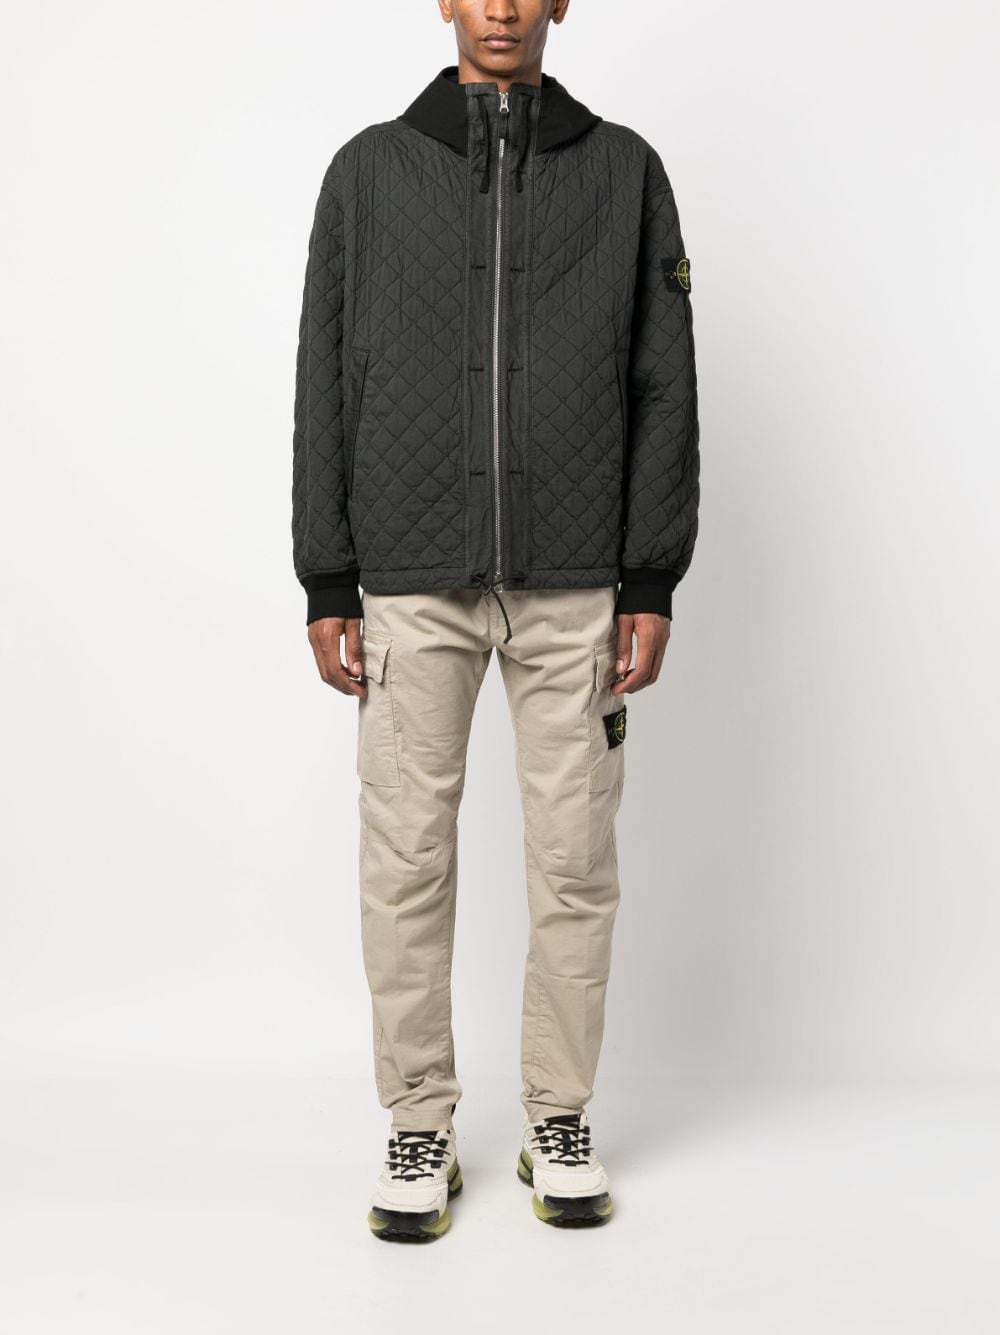 Stone Island quilted hooded zip-up jacket - Grijs